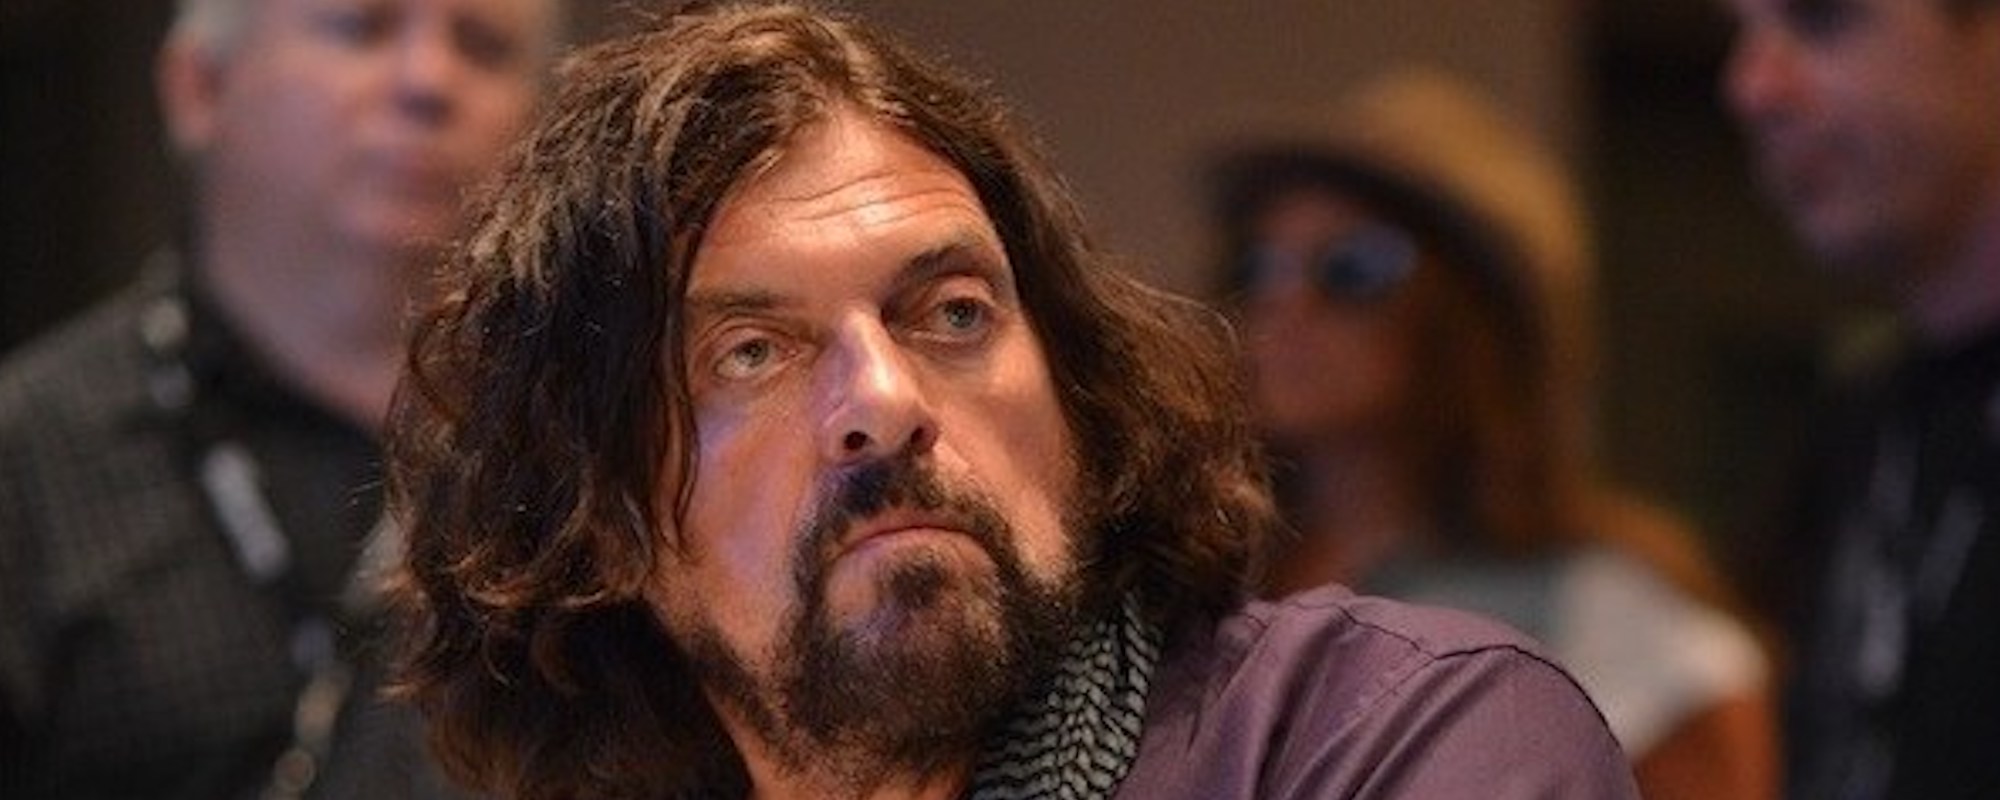 Alan Parsons Undergoes Emergency Spinal Surgery